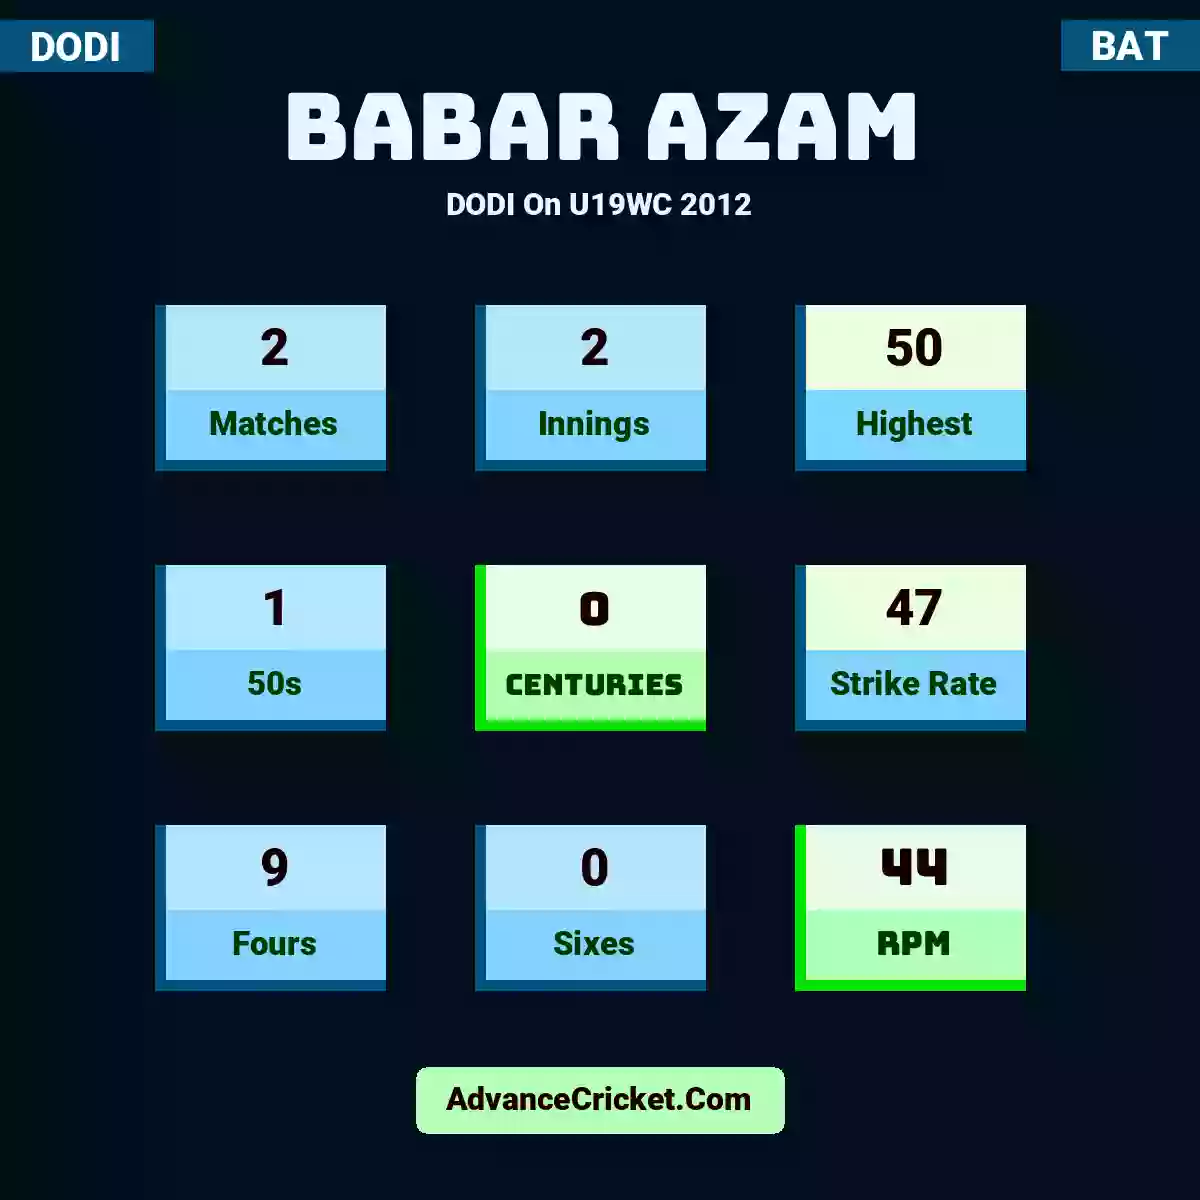 Babar Azam DODI  On U19WC 2012, Babar Azam played 2 matches, scored 50 runs as highest, 1 half-centuries, and 0 centuries, with a strike rate of 47. B.Azam hit 9 fours and 0 sixes, with an RPM of 44.